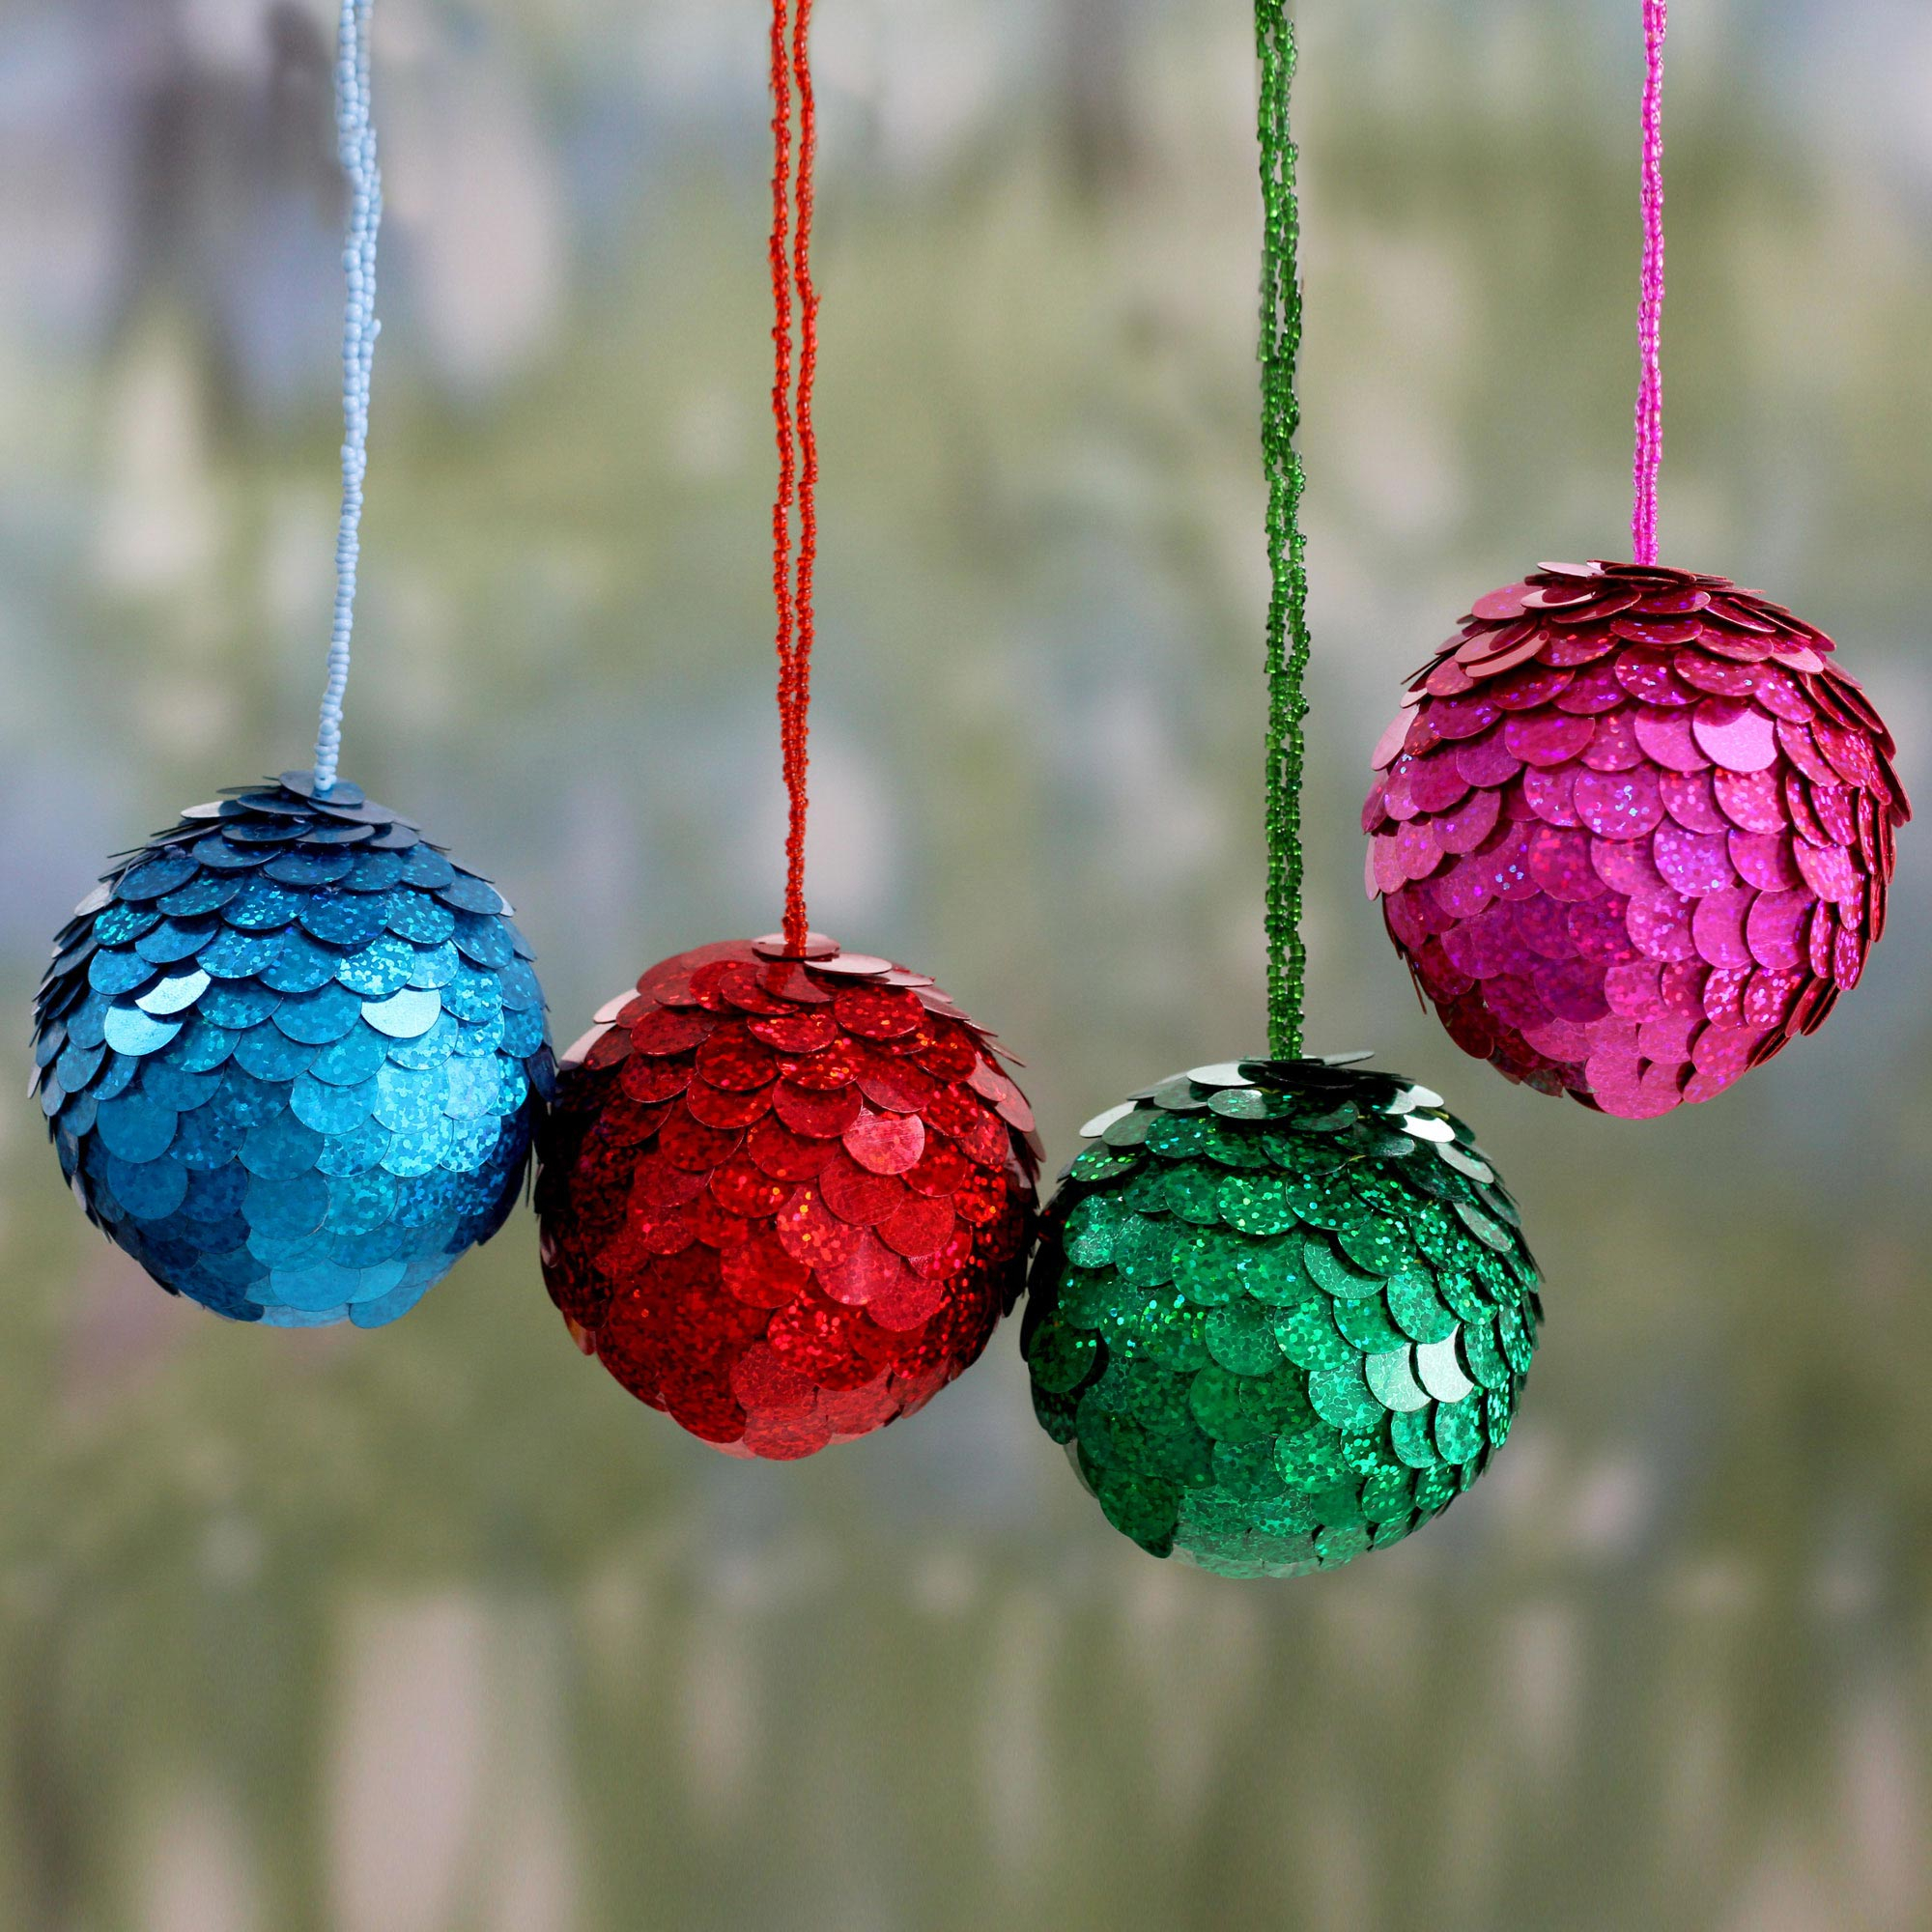 Hand Crafted Holiday Ornaments in Bright Colors (Set of 4) - Sparks of ...